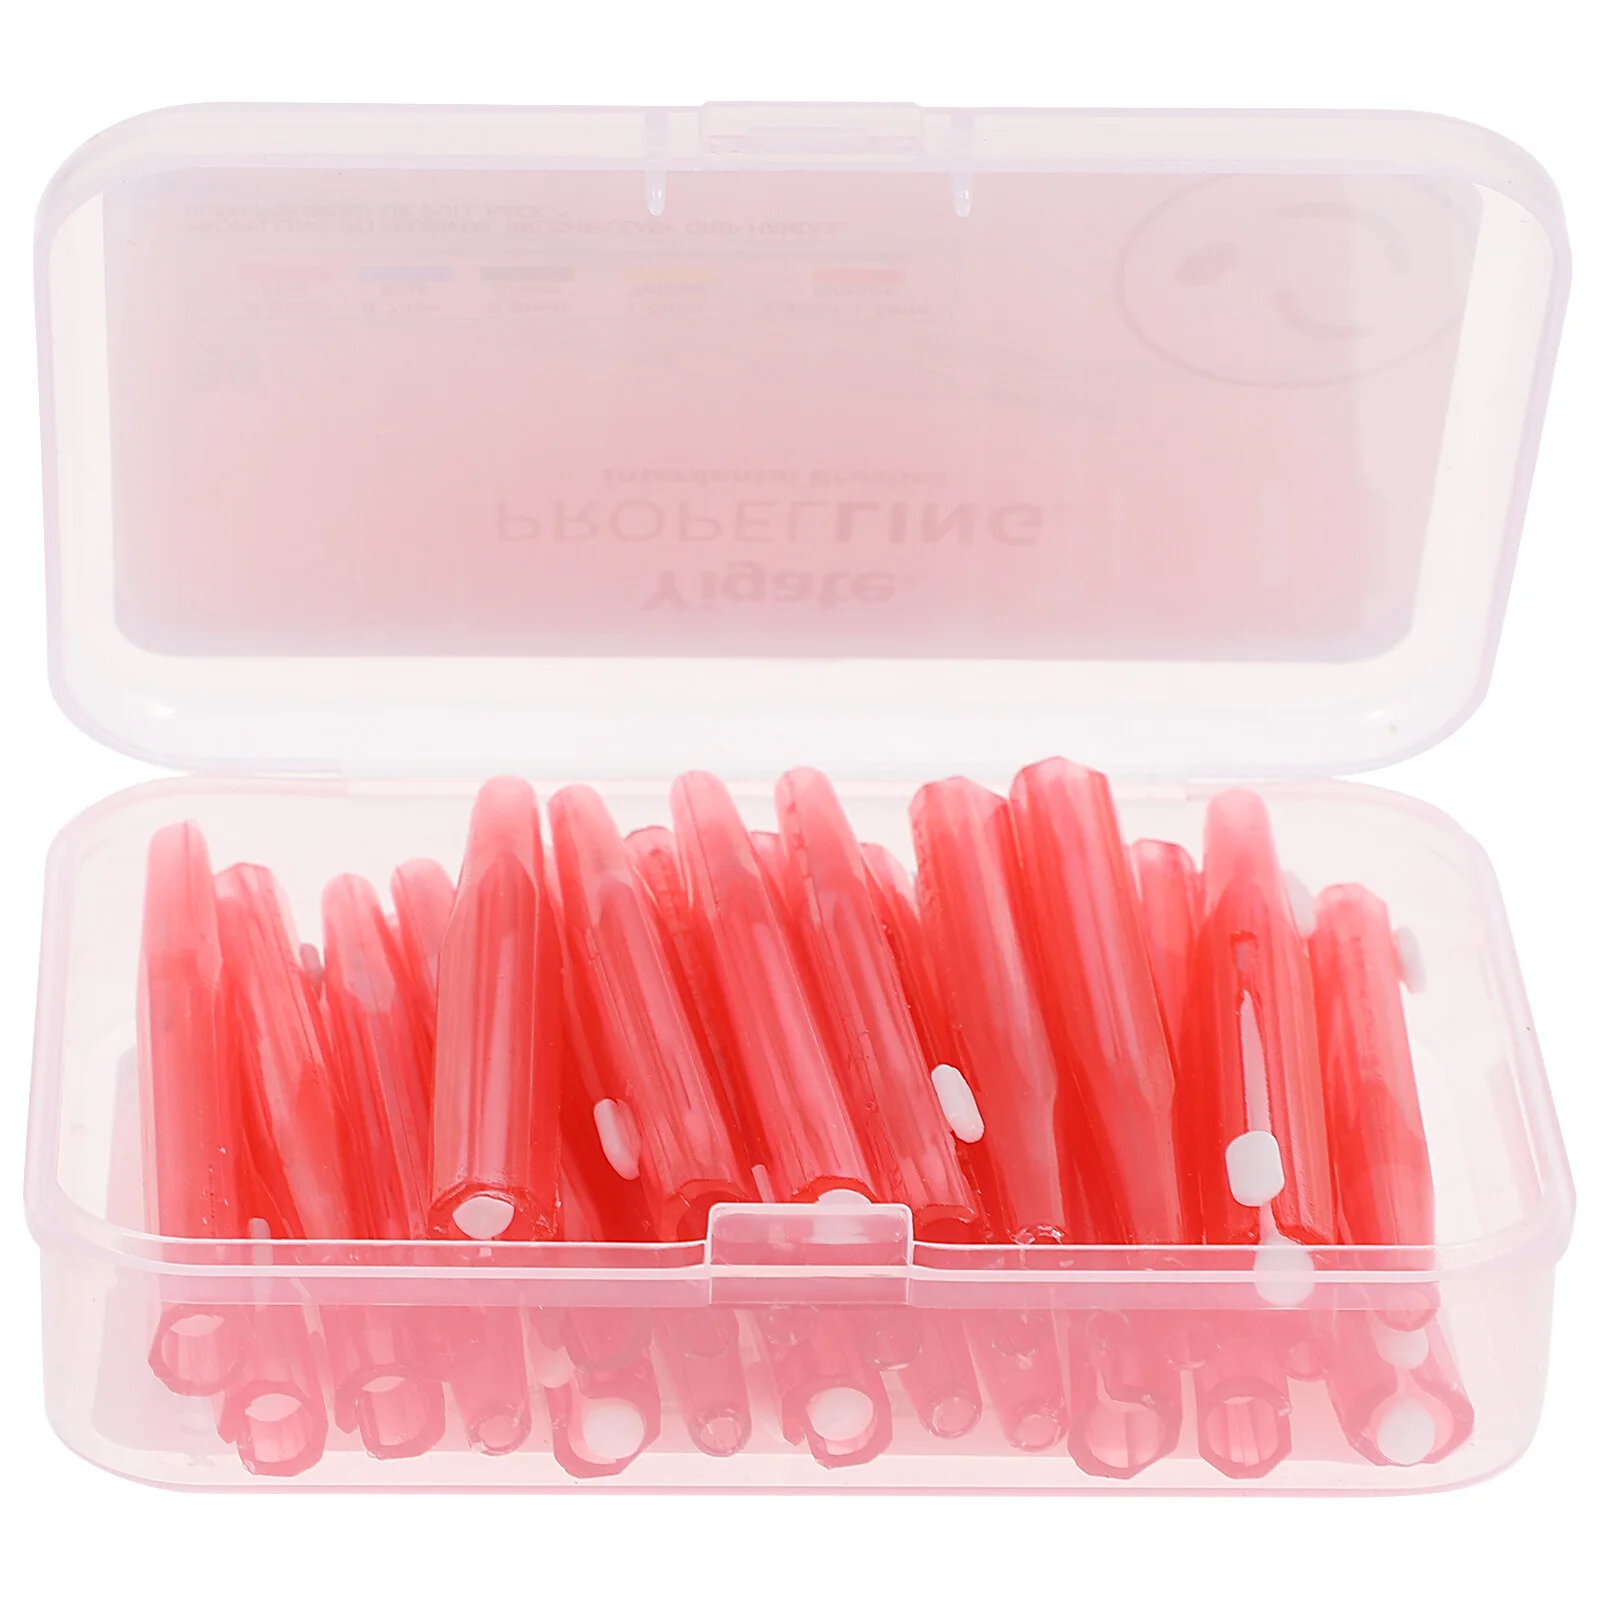 

Brush Interdental Floss Teeth Dental Tooth Picks Oral Toothpick Cleaning Cleaners Brushes Flossers Between Toothpicks Flossing